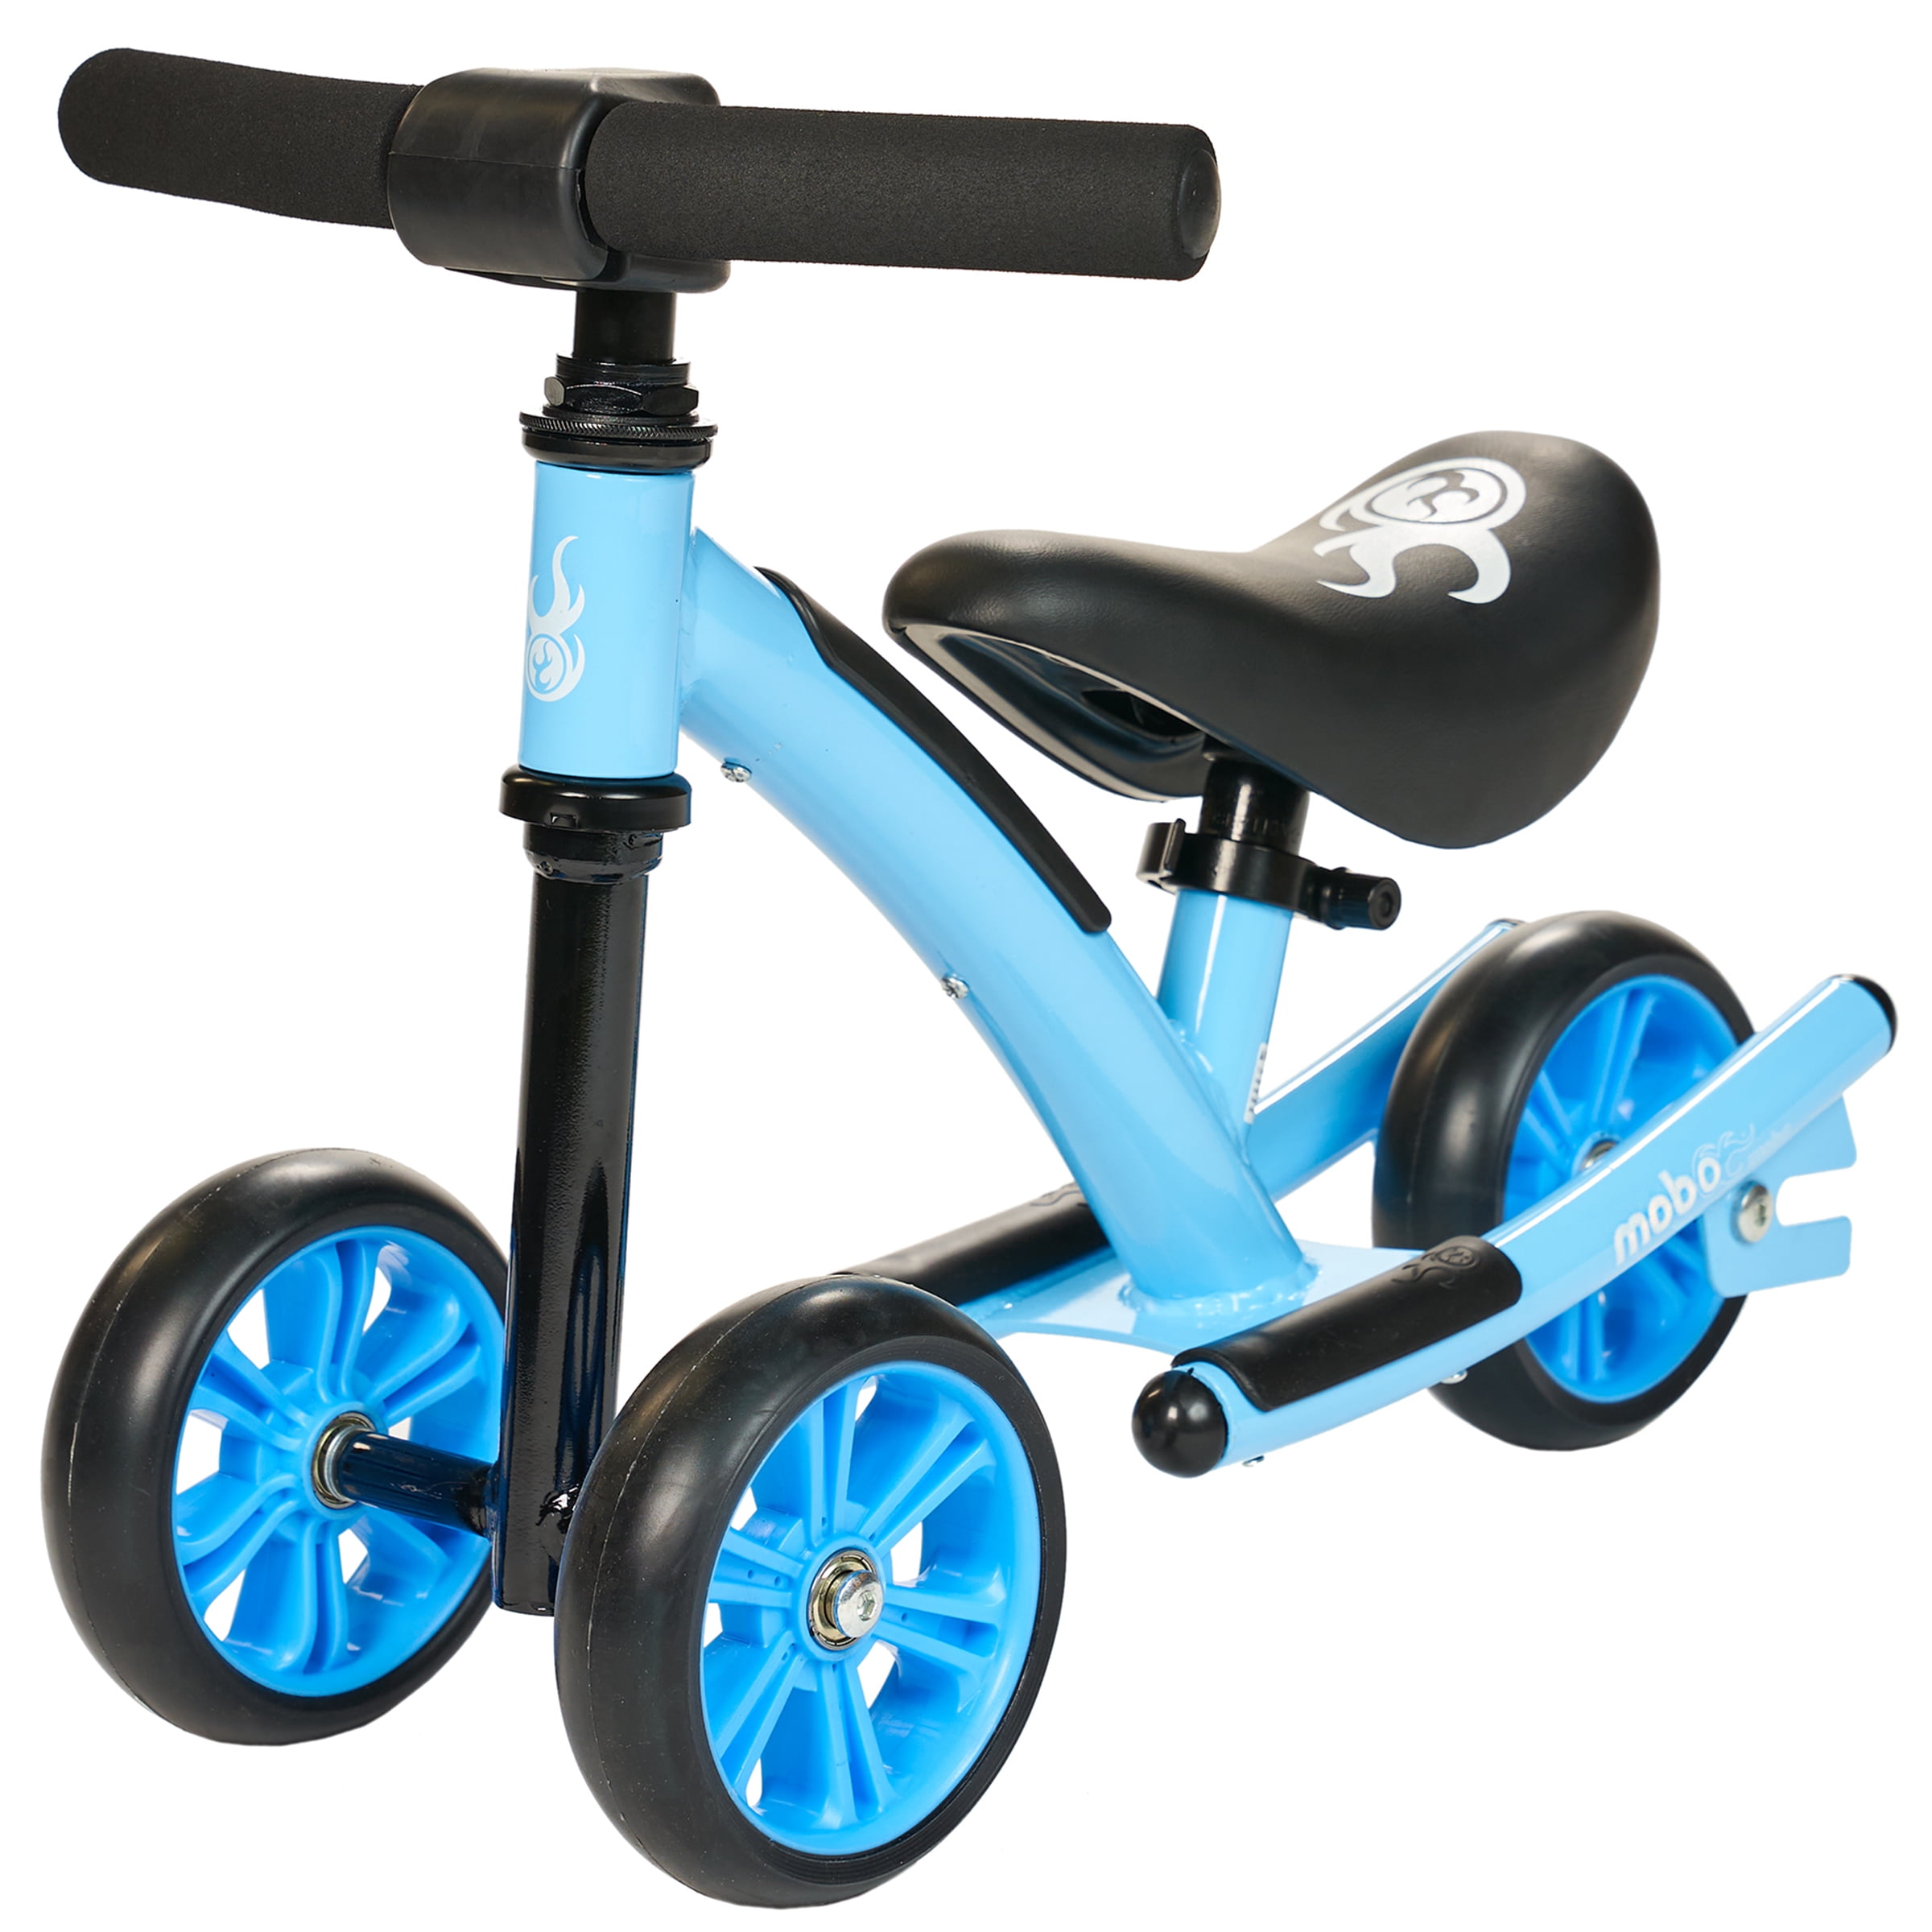 Mobo Wobo 2-in-1 Rocking Baby Balance Bike, 1-3 Years Old, Ride On Toy ...